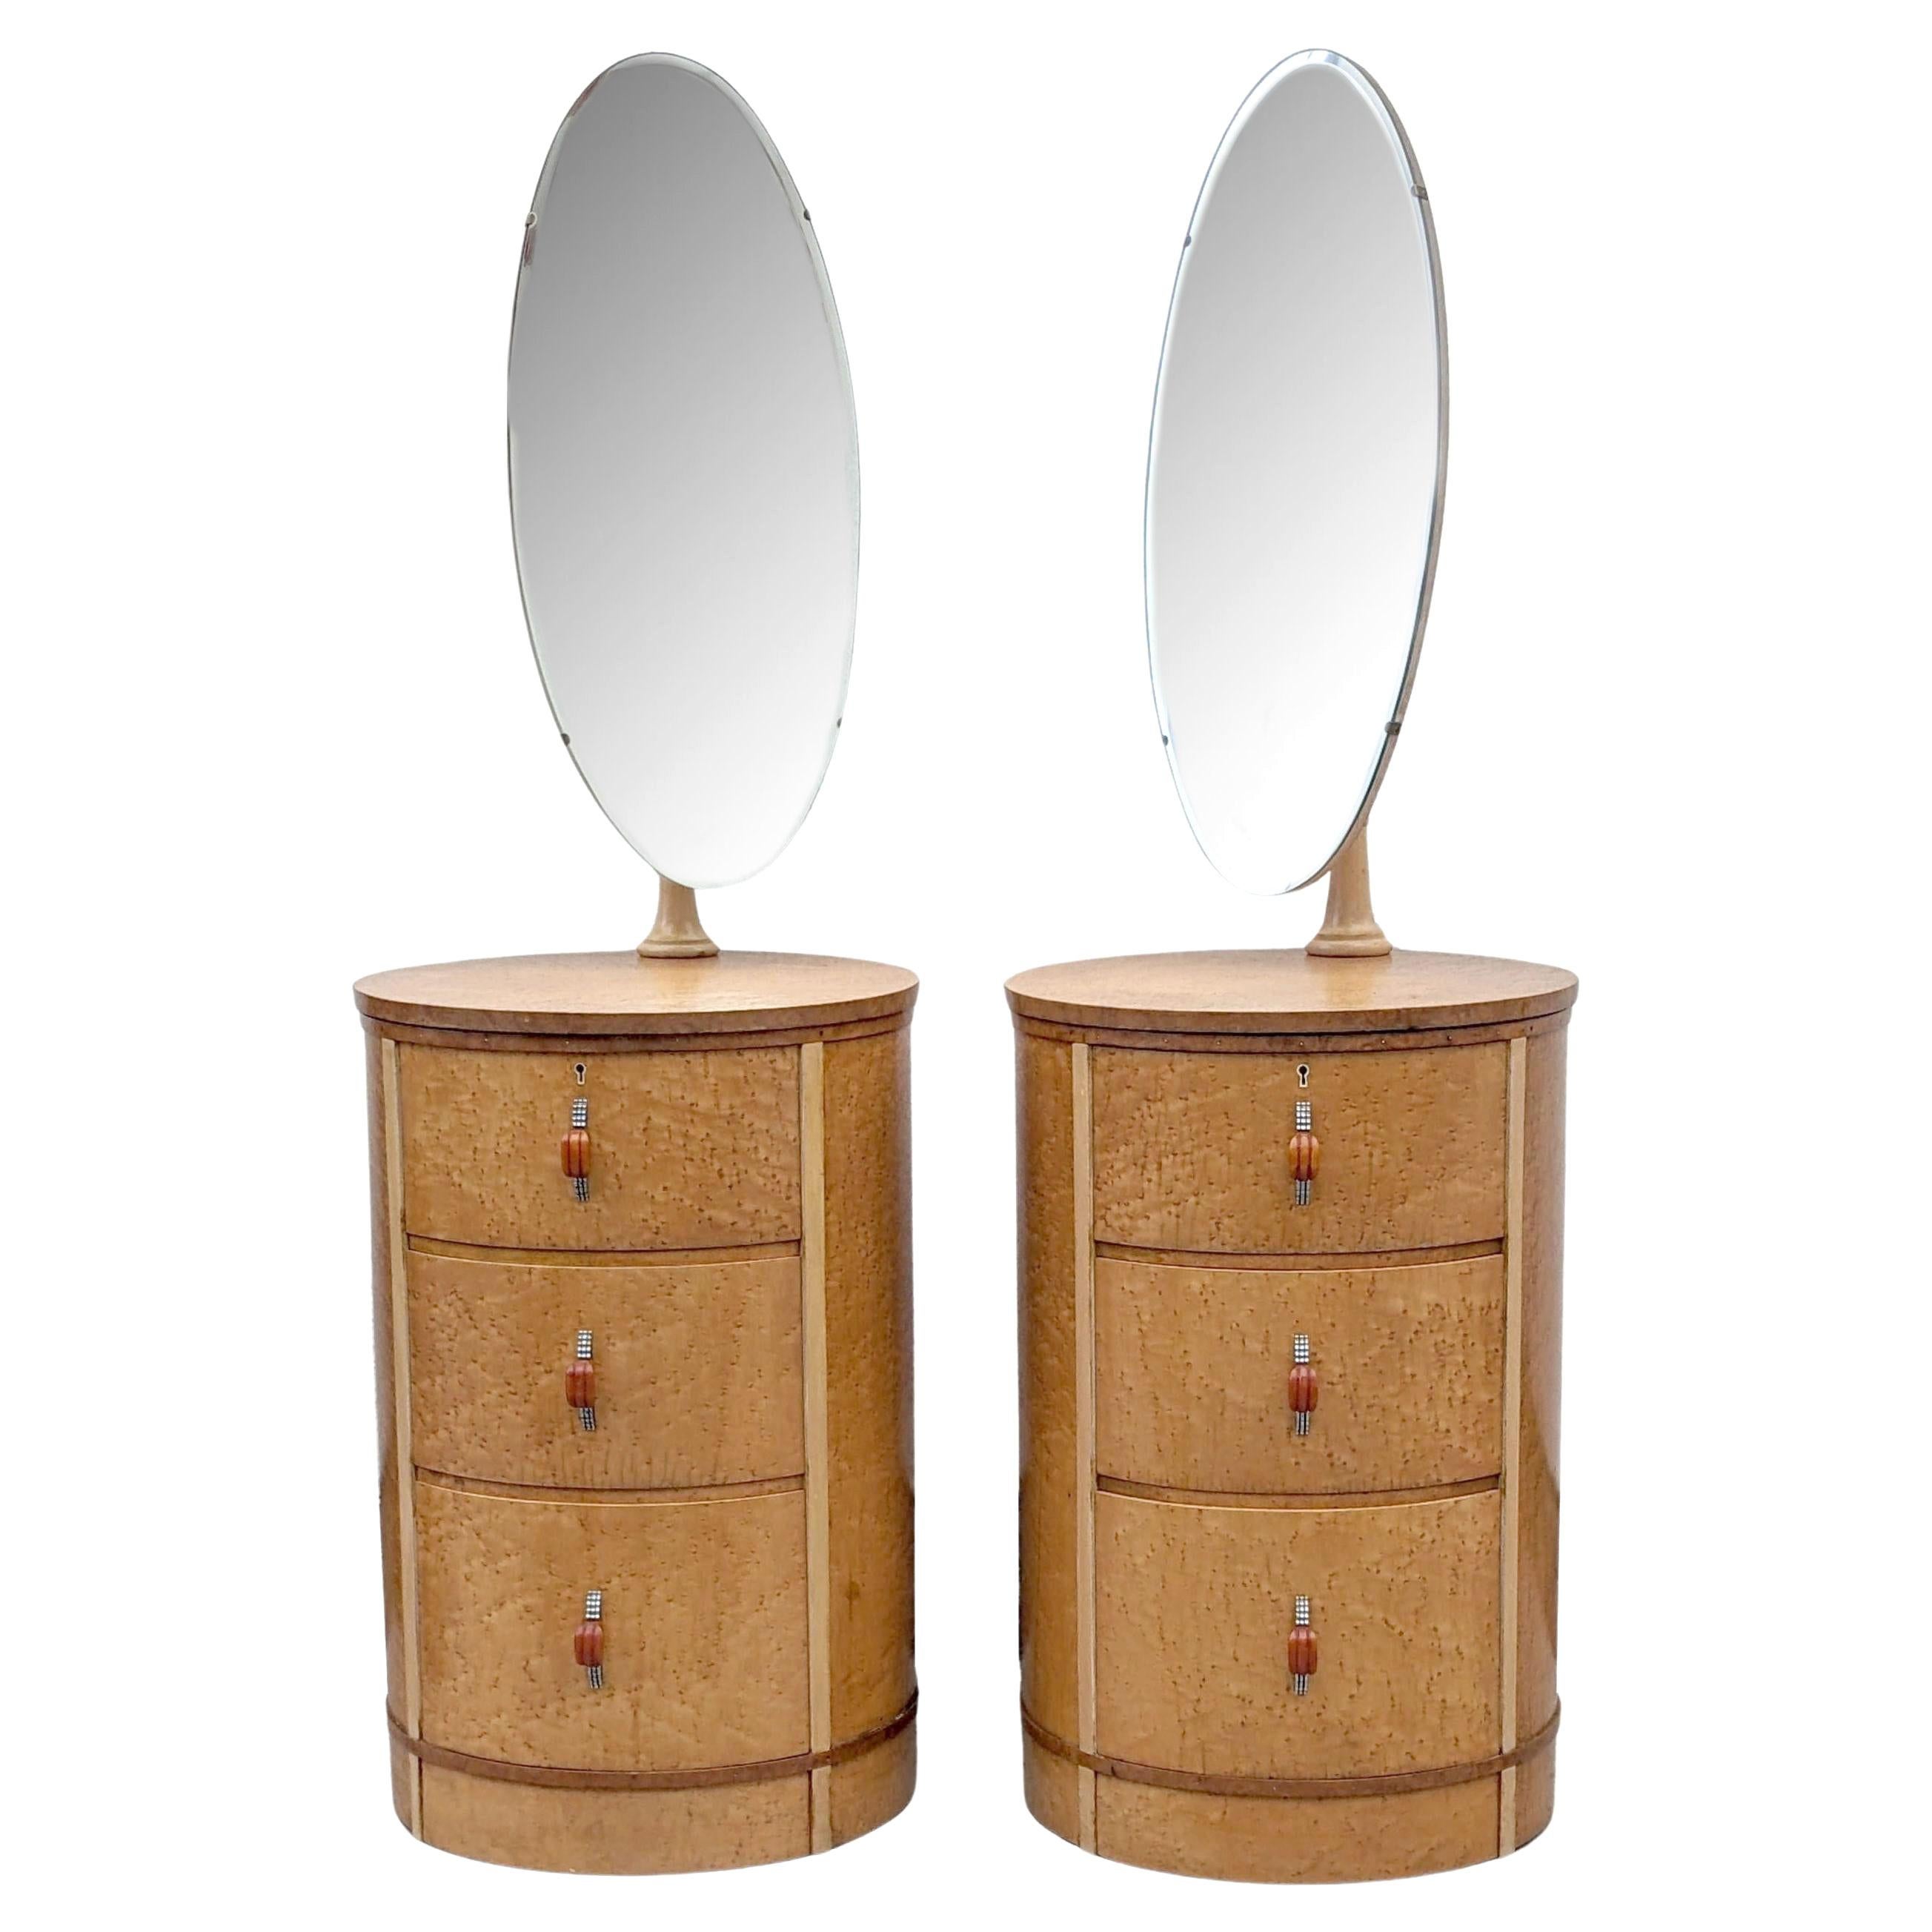 Art Deco Drum Shaped Maple Bedside Tables Night Stands With Mirrors, c1930 In Good Condition For Sale In Devon, England